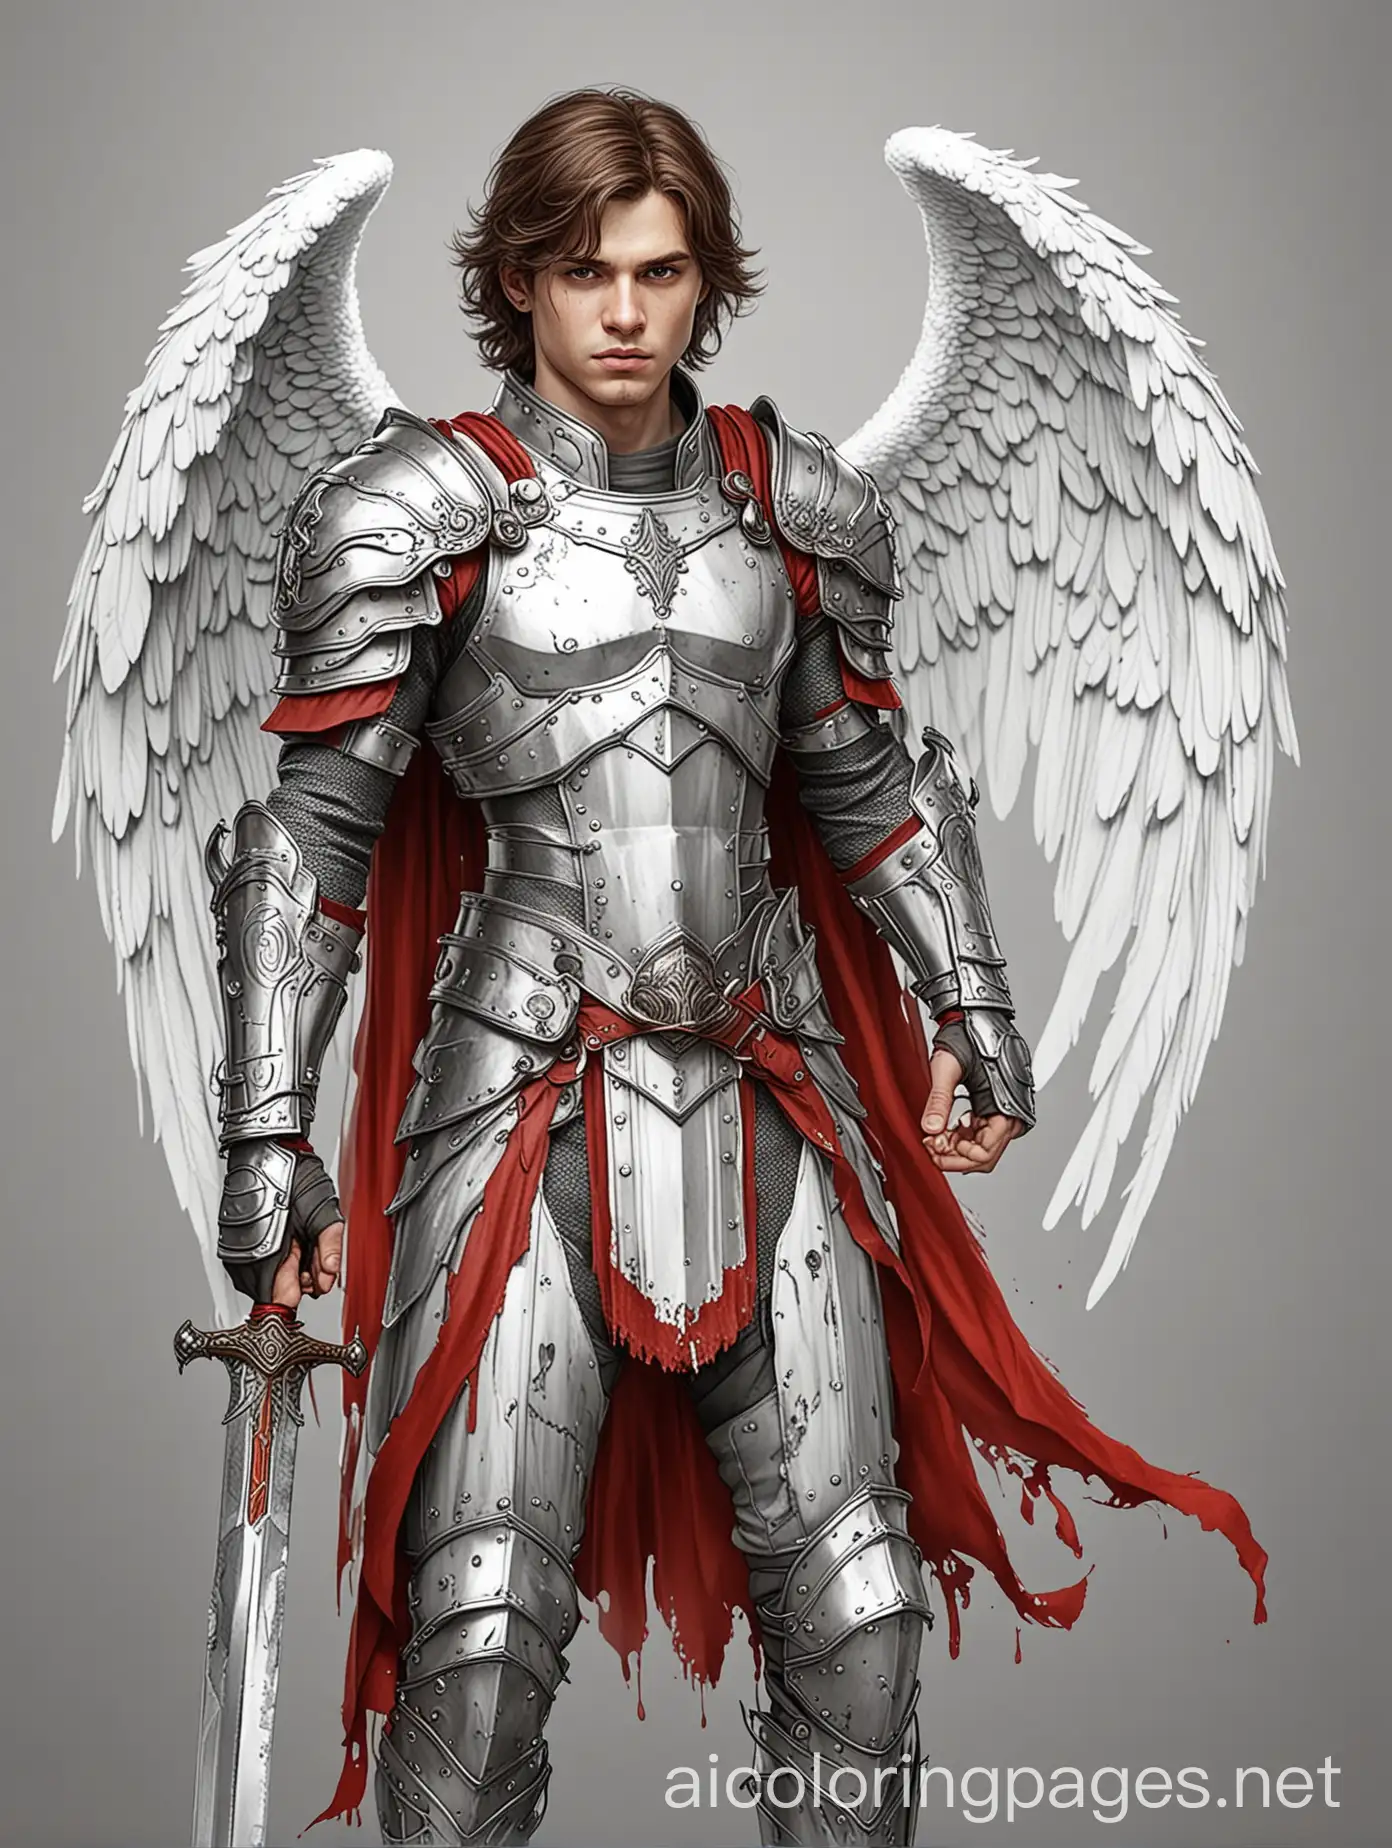 Full color, Red, damaged and bleeding, cut and scared, 25 year old male angel with a greatsword in hand, and in damaged plate armor, Coloring Page, black and white, line art, white background, Simplicity, Ample White Space. The background of the coloring page is plain white to make it easy for young children to color within the lines. The outlines of all the subjects are easy to distinguish, making it simple for kids to color without too much difficulty